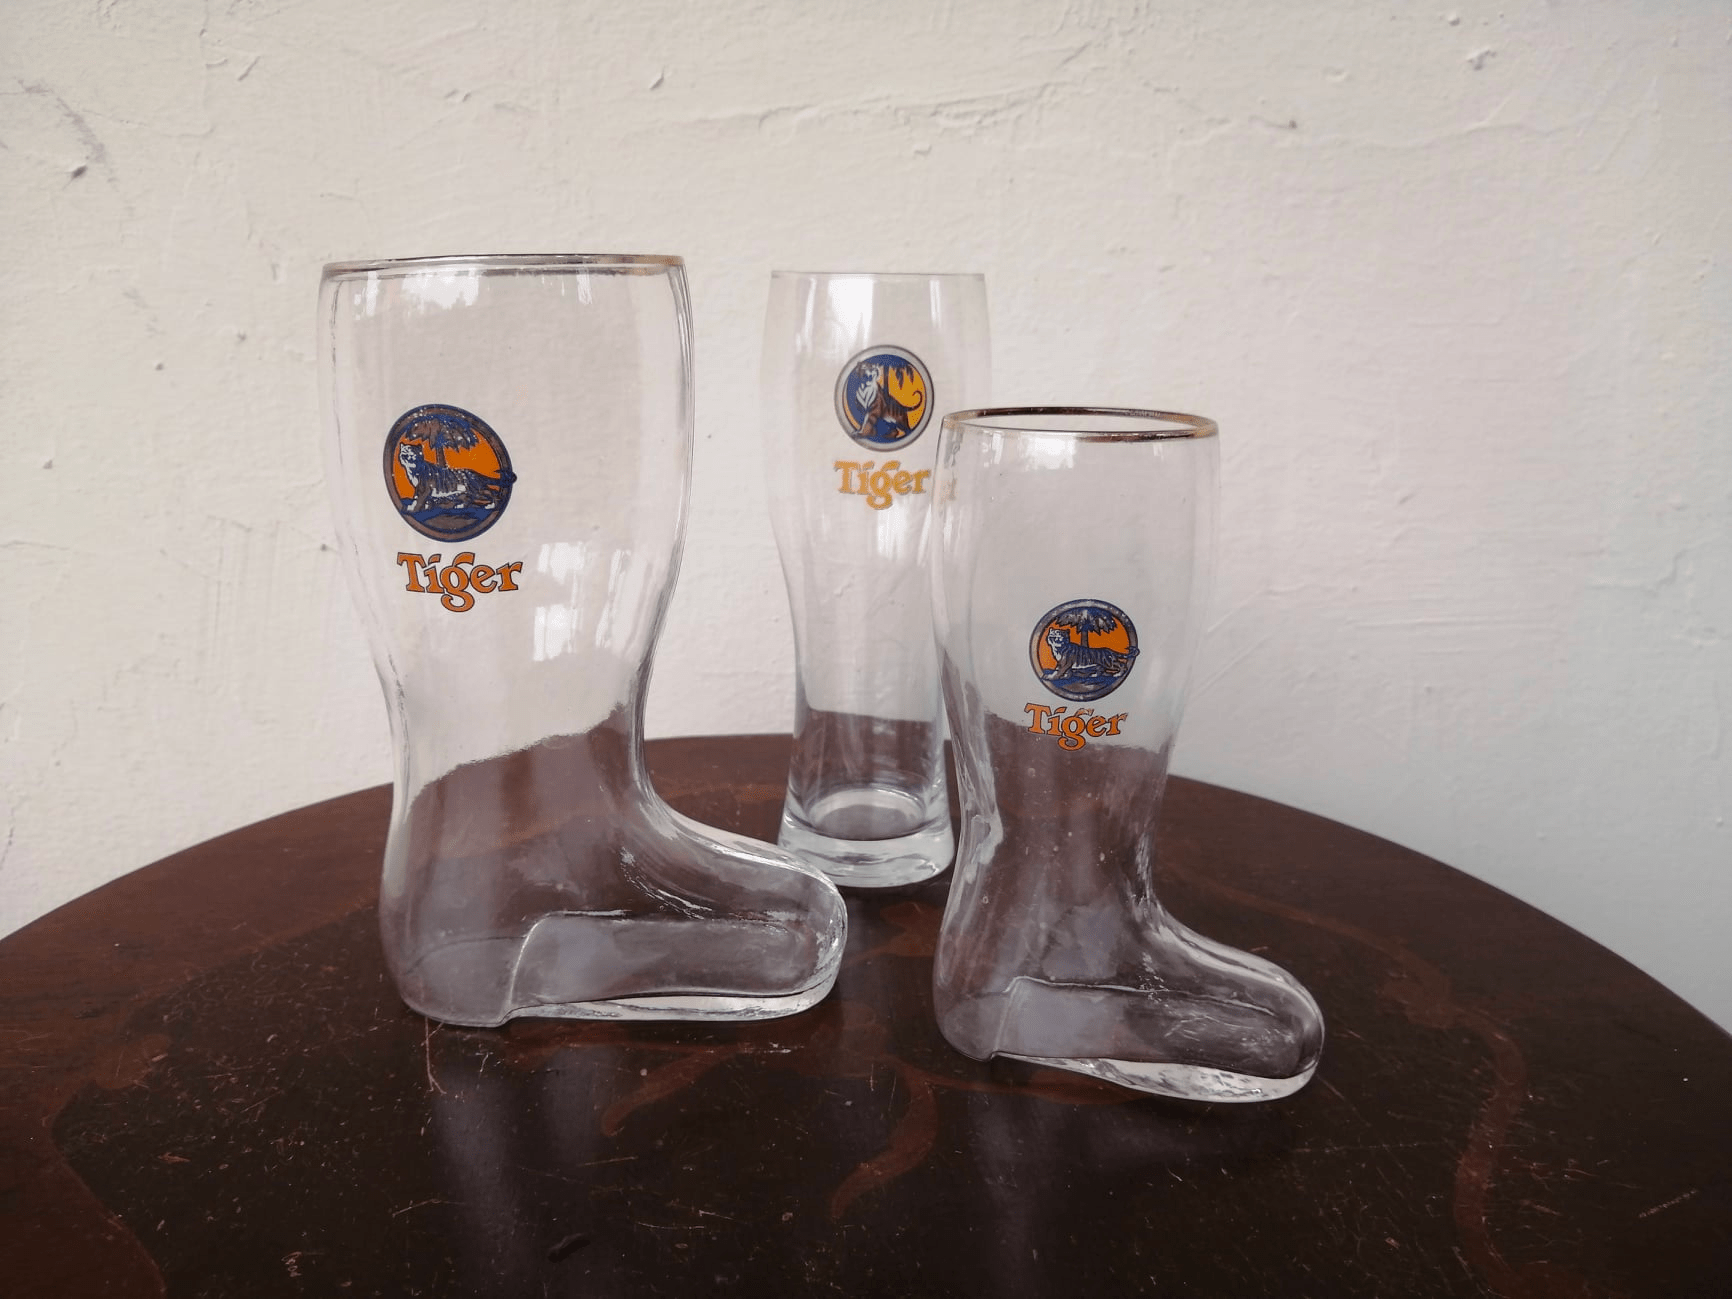 by my old school - Tiger Beer boot-shaped glasses